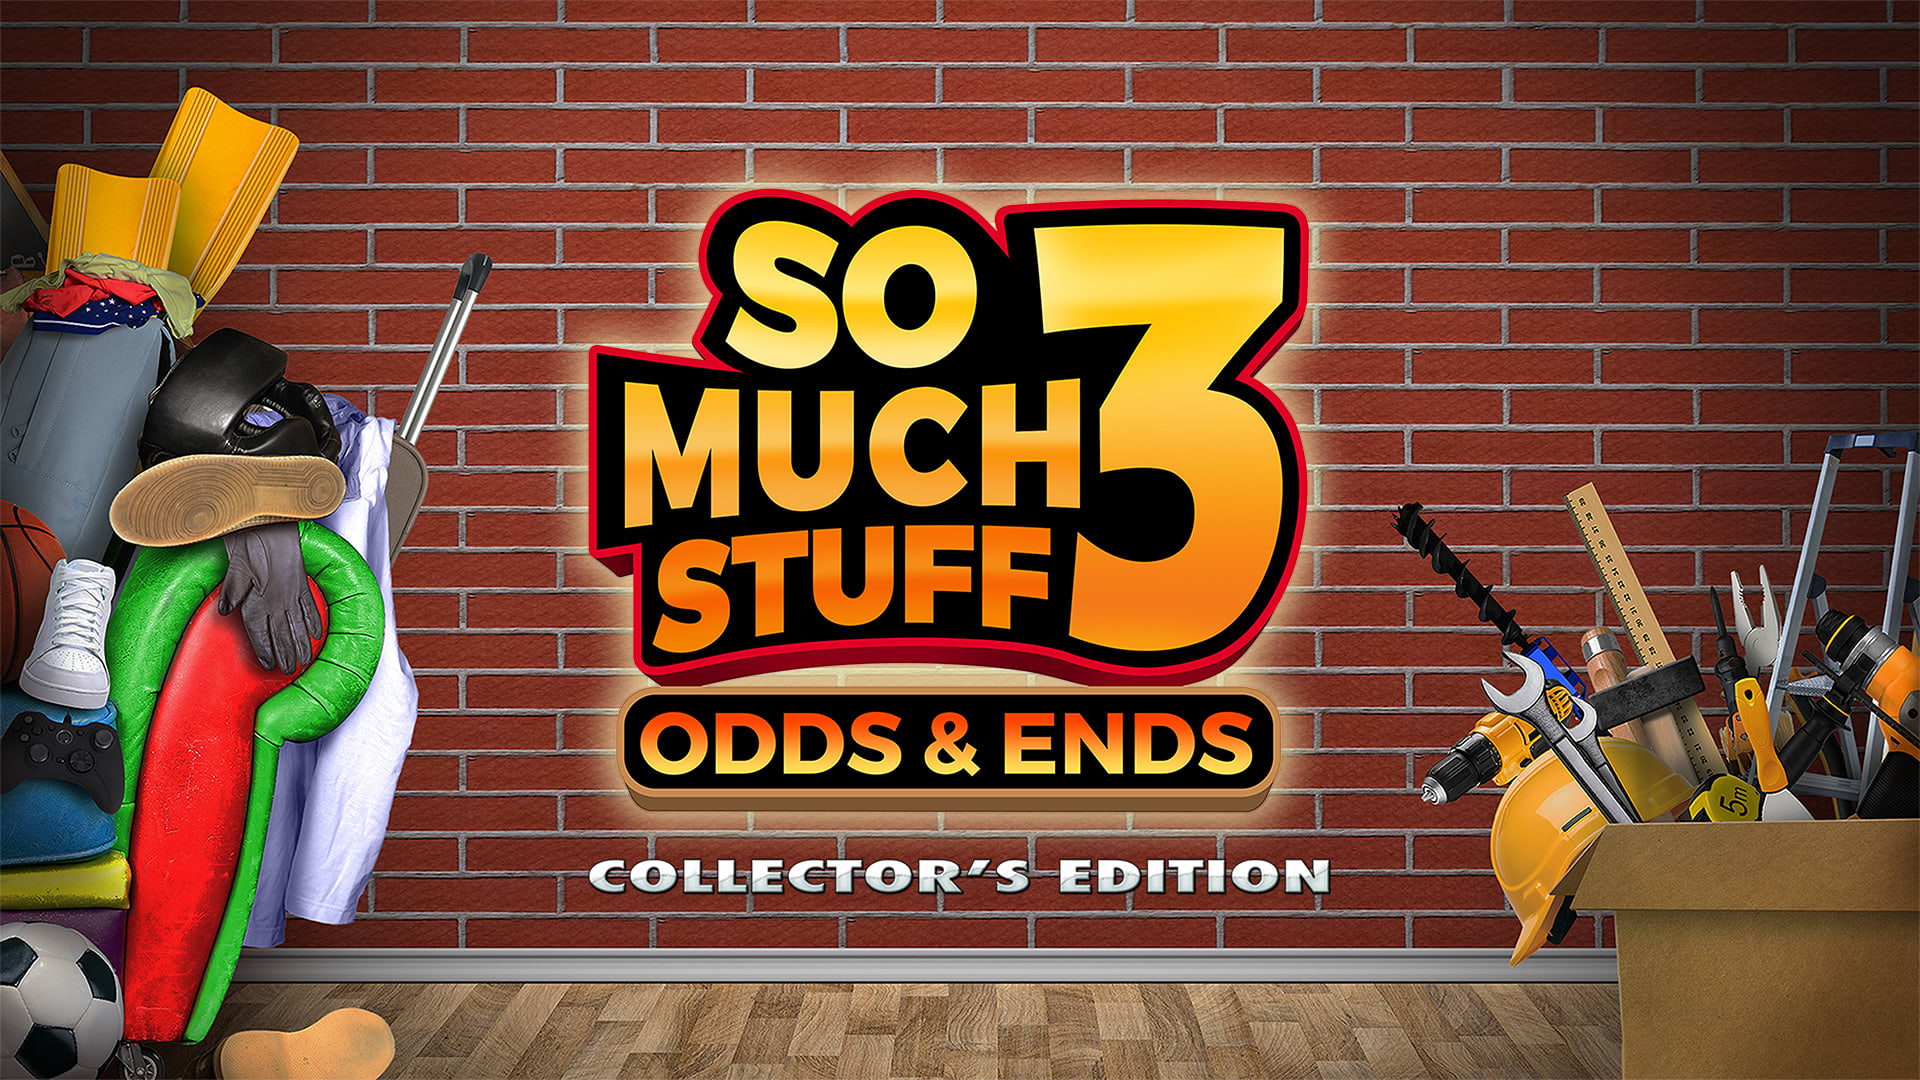 So Much Stuff 3: Odds & Ends Collector's Edition